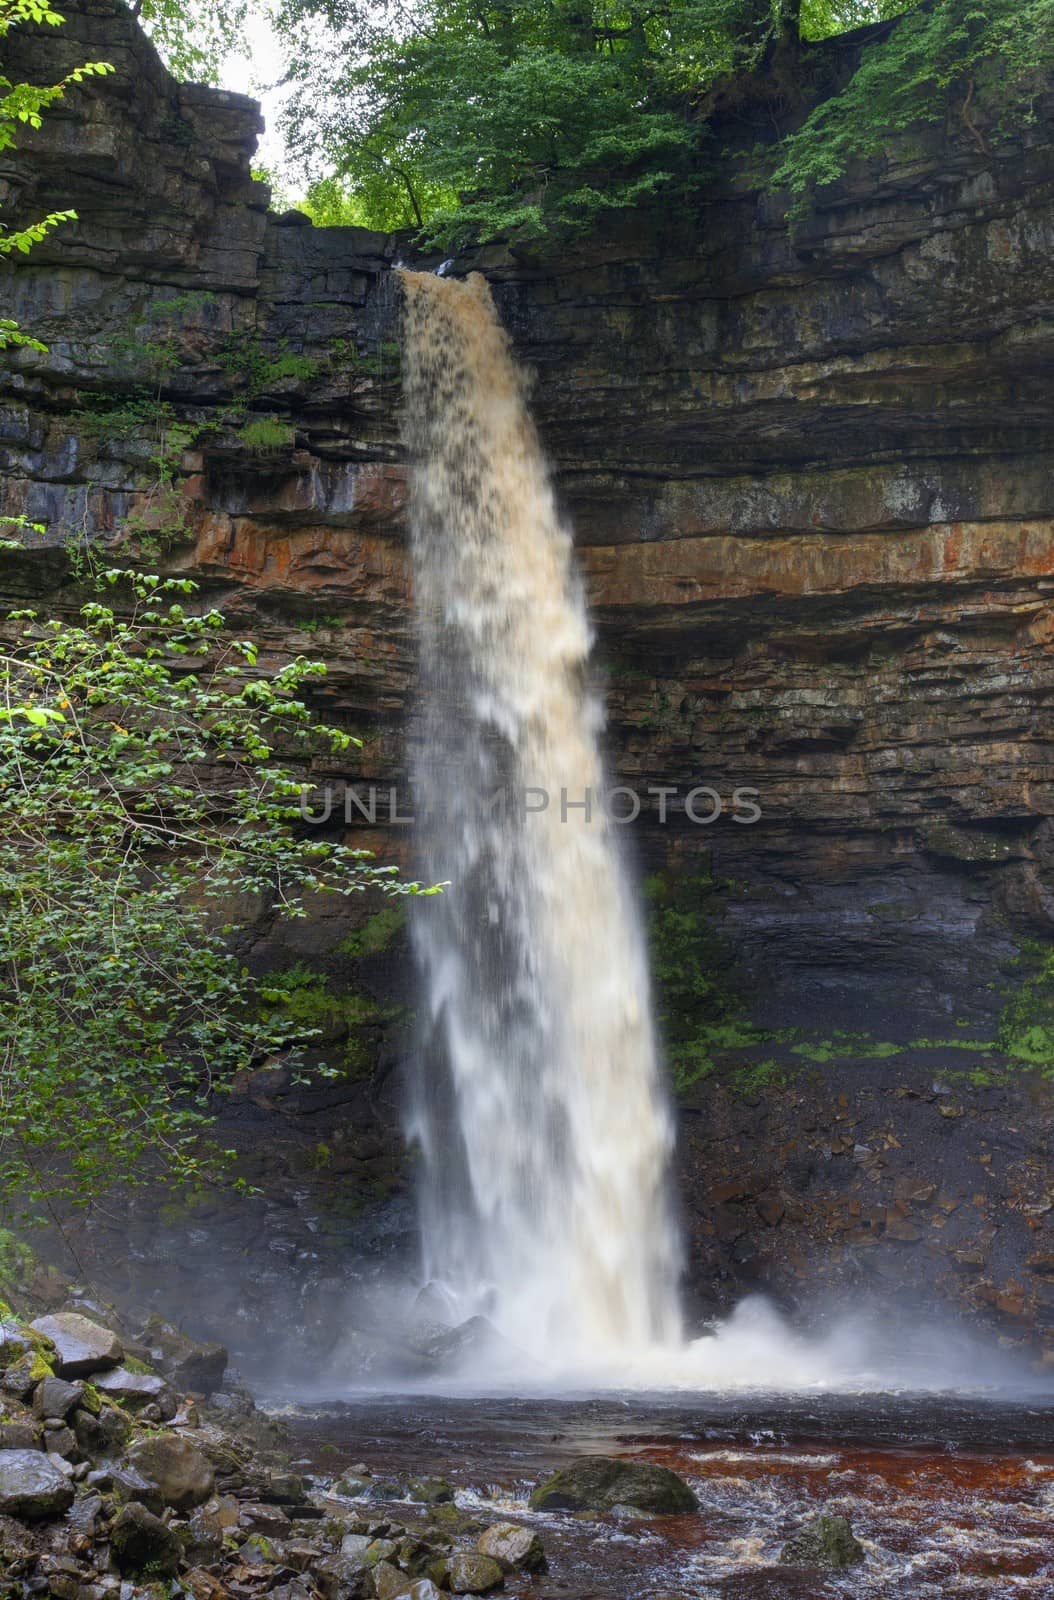 Hardraw Force waterfall, Yorkshire Dales National Park, England.